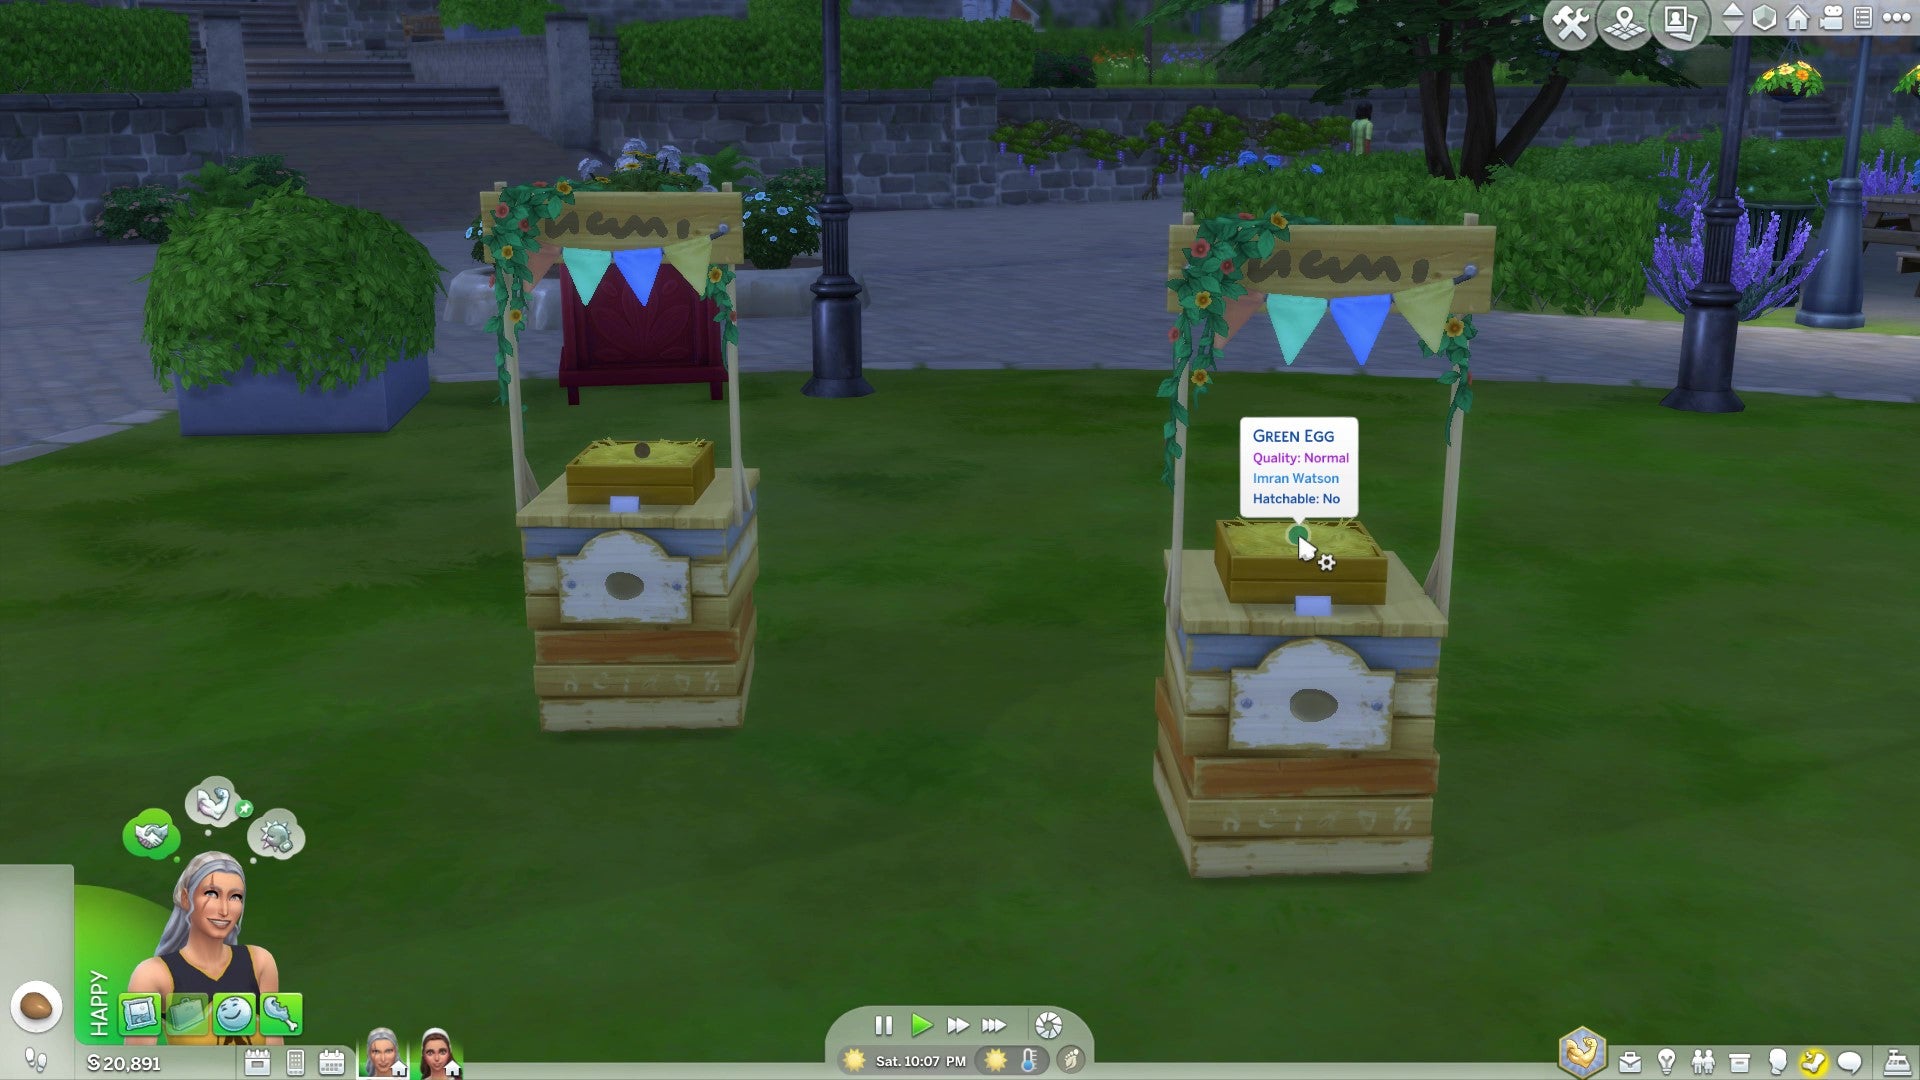 Competition stalls in The Sims 4 with multi-coloured eggs on them.